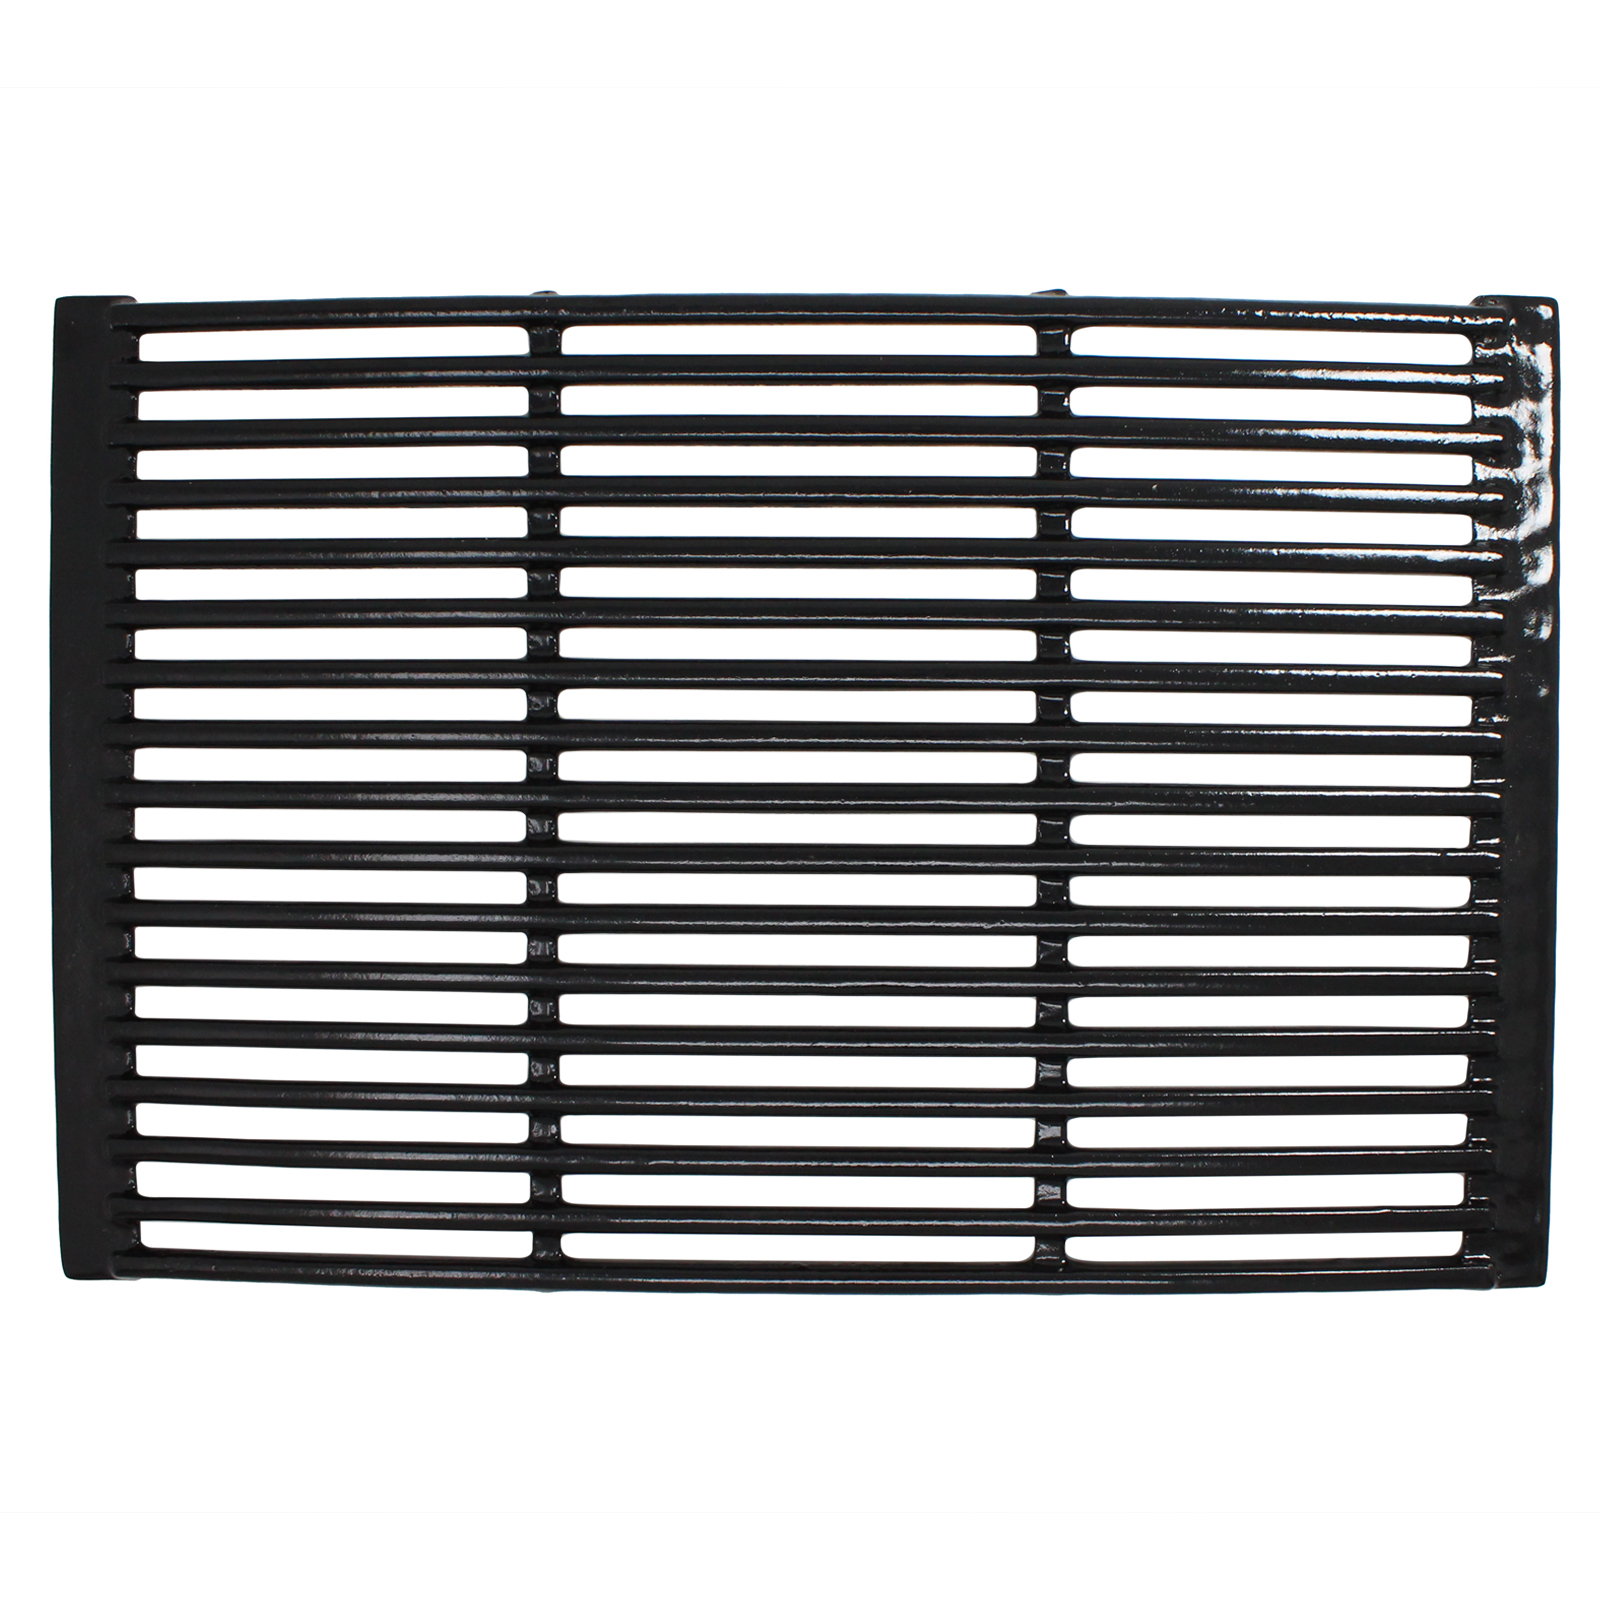 BBQ Grill Cooking Grates Replacement Parts for Grill Zone 6305 (810-6305-T) - Compatible Barbeque Porcelain Enameled Cast Iron Grid 19" - image 4 of 4